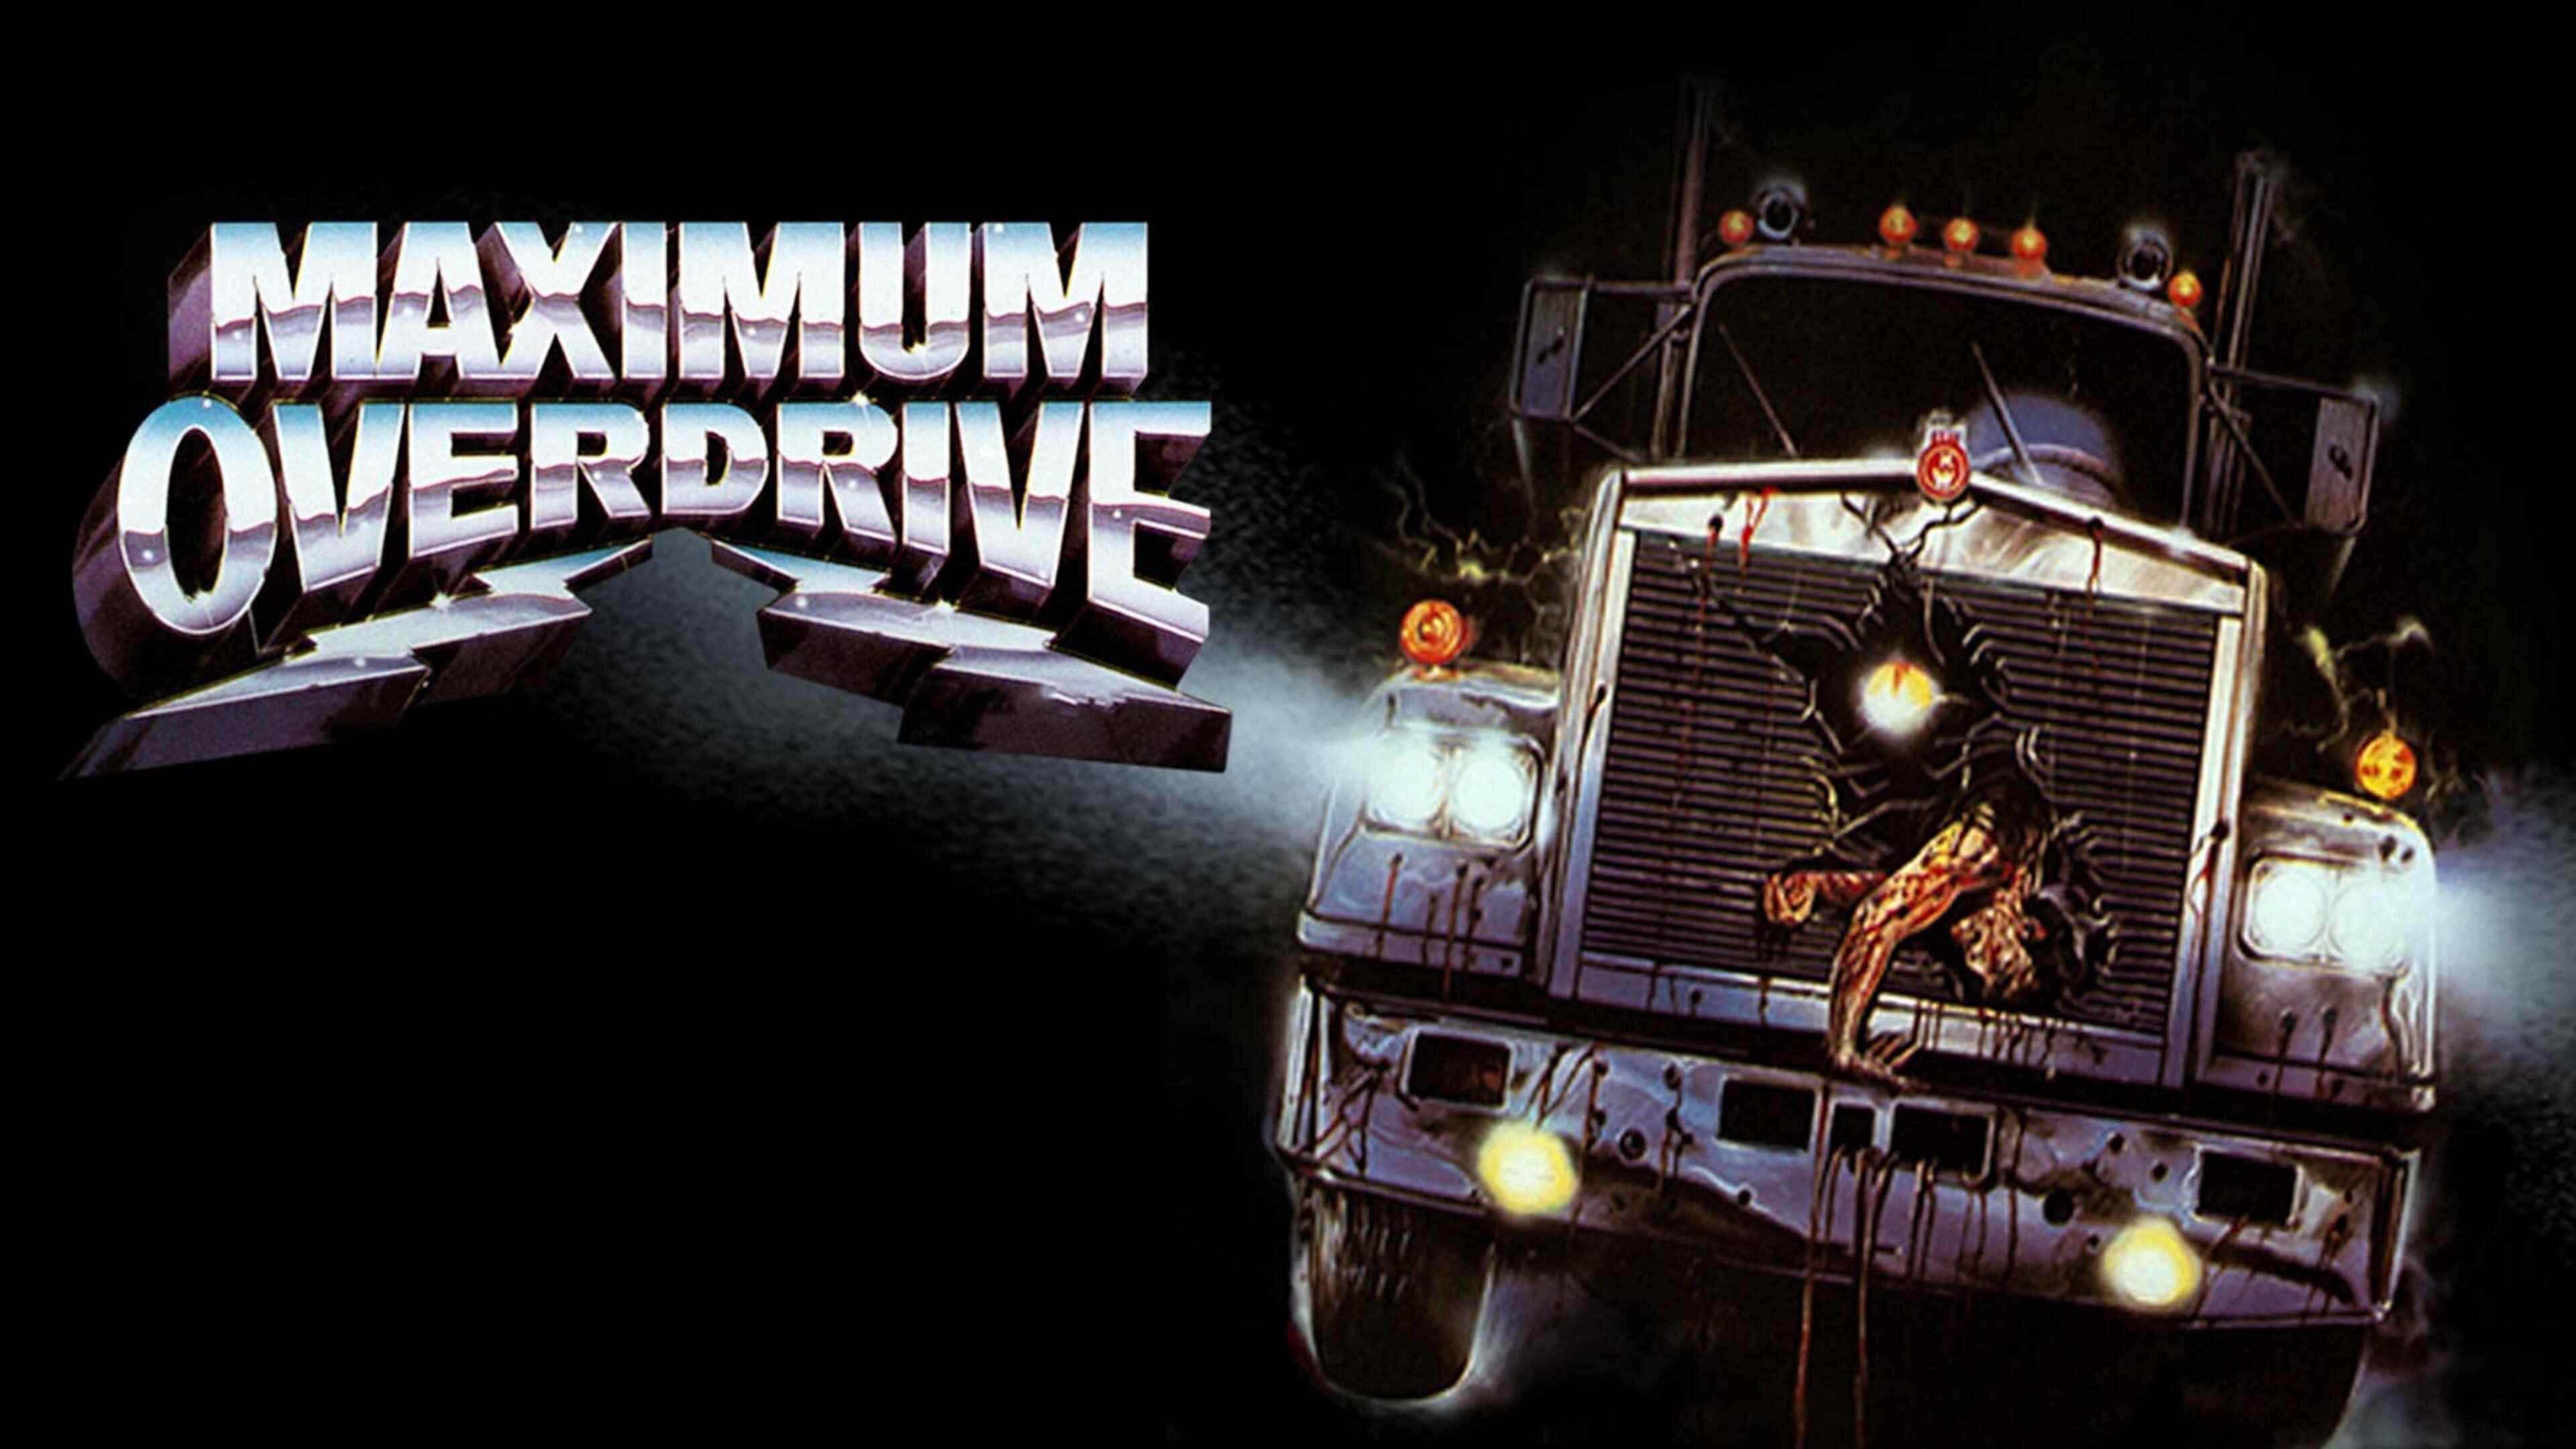 41-facts-about-the-movie-maximum-overdrive